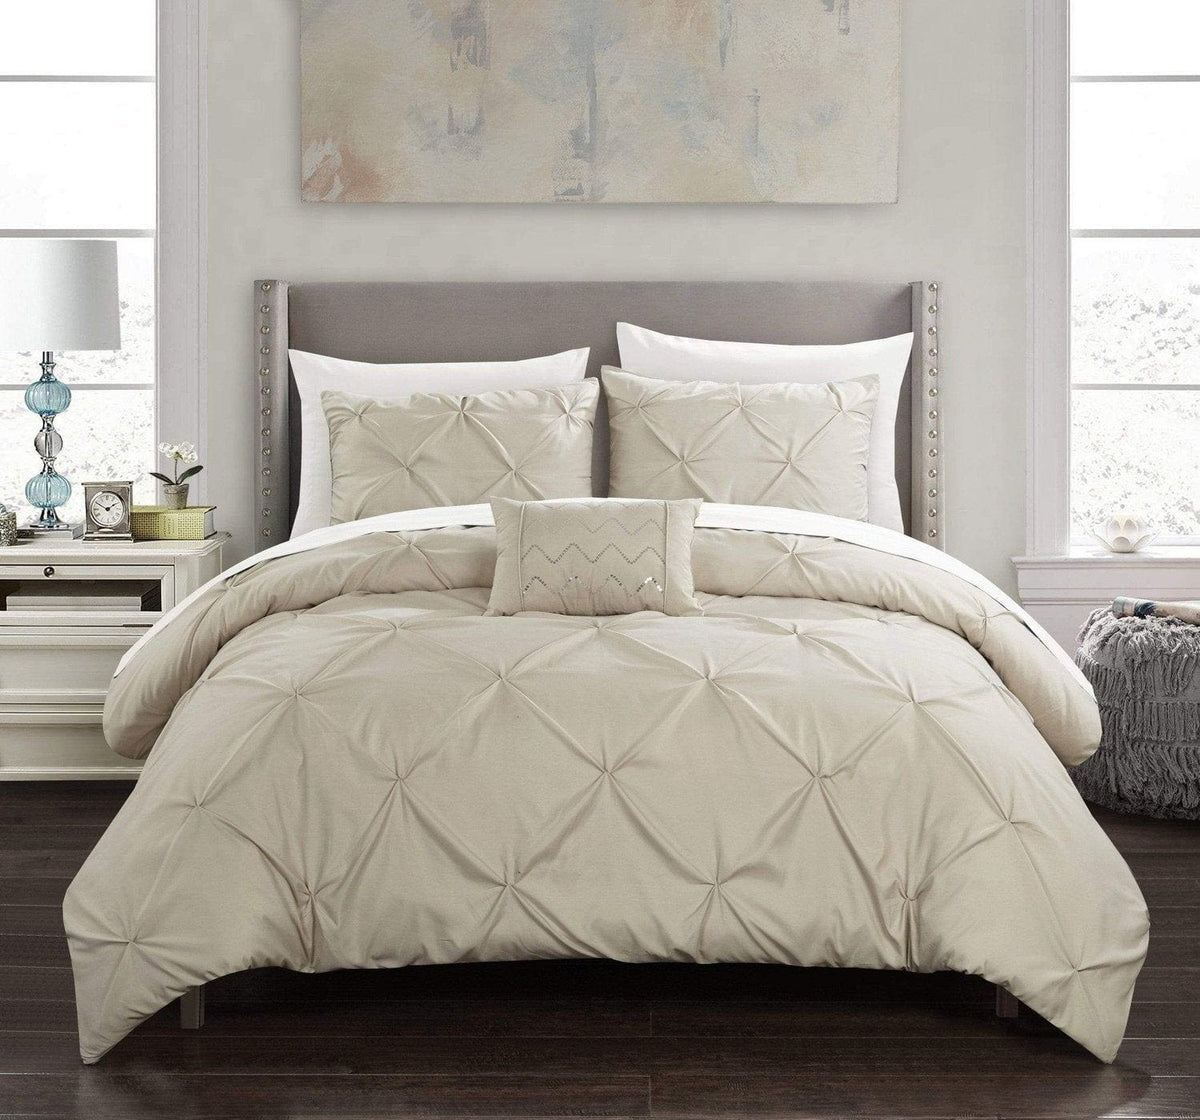 Chic Home Daya 4 Piece Pinch Pleat Duvet Cover Set Taupe